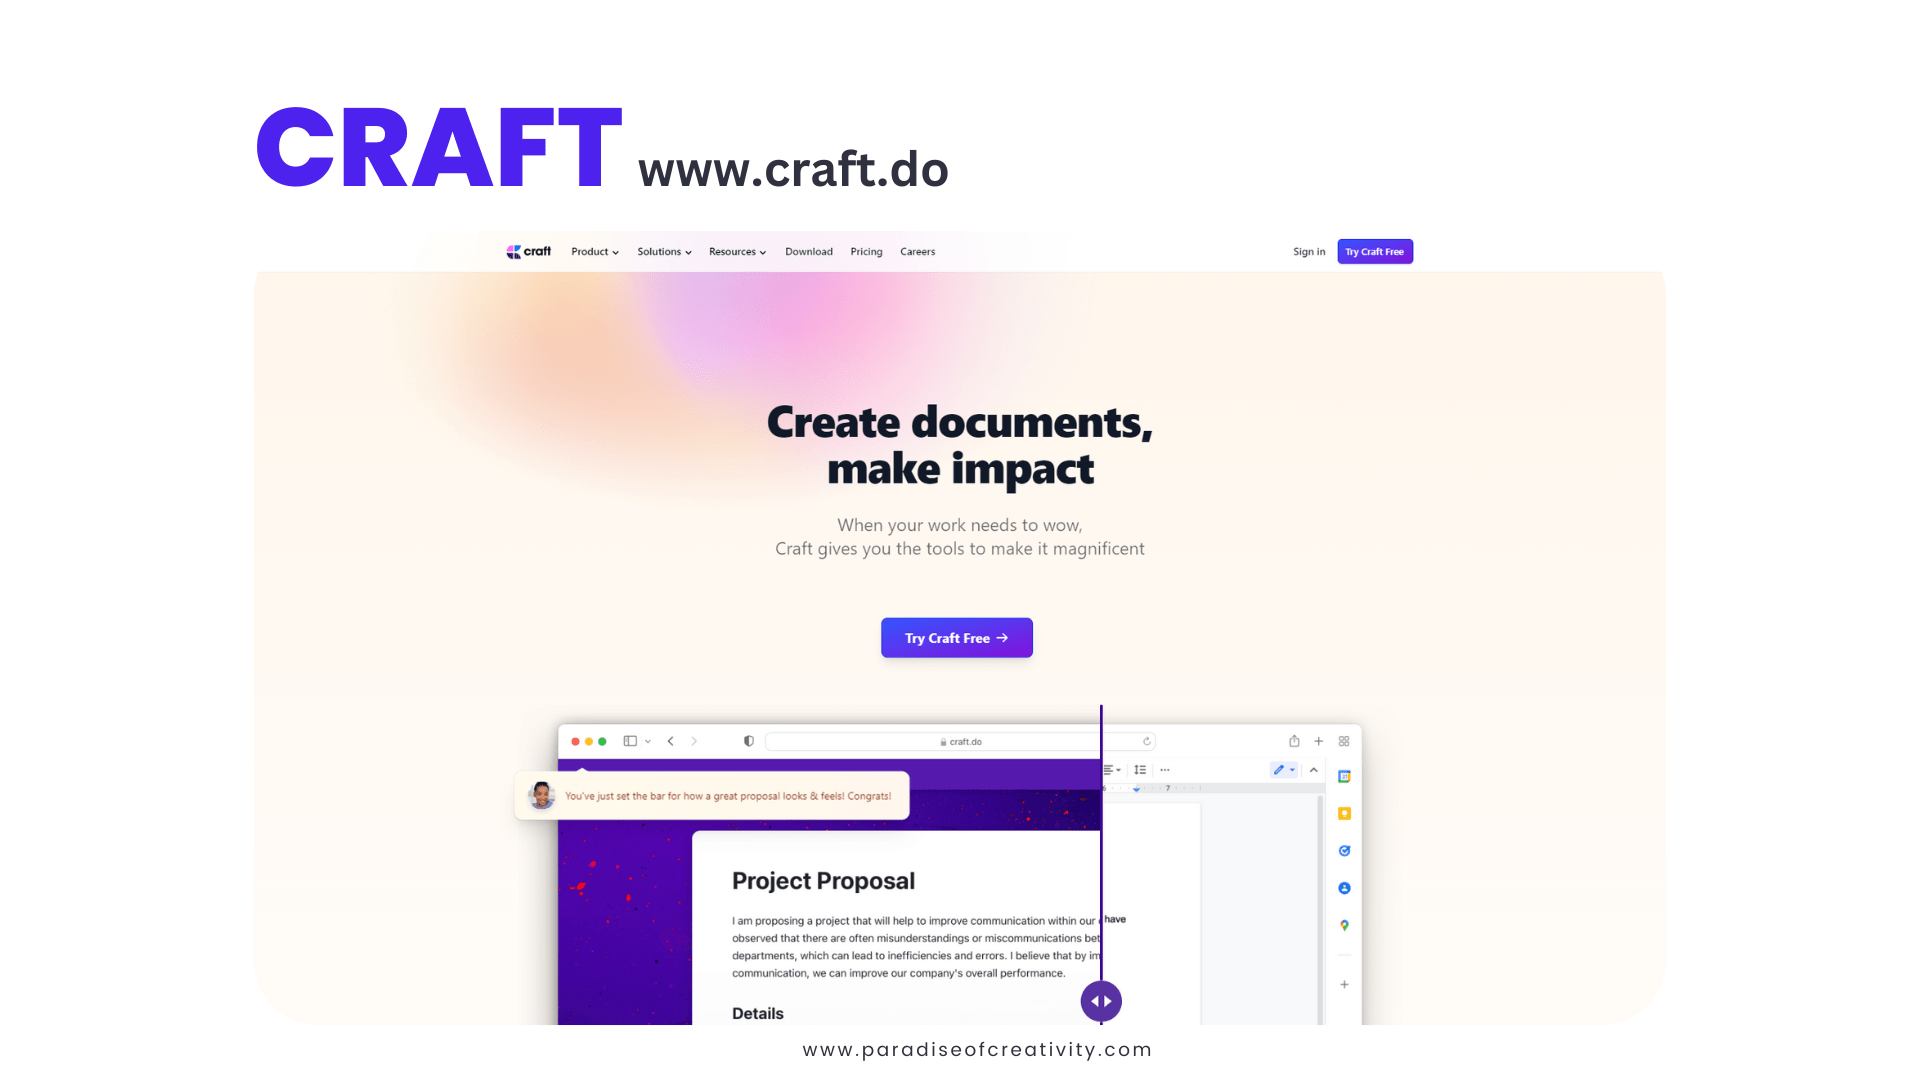 Craft is a plugin from InVision allows for easy collaboration and sharing of designs with team members. You can easily invite others to view and comment on your work, as well as share links to your prototypes. This makes it easy to gather feedback and make changes in real-time without having to go back and forth between team members.